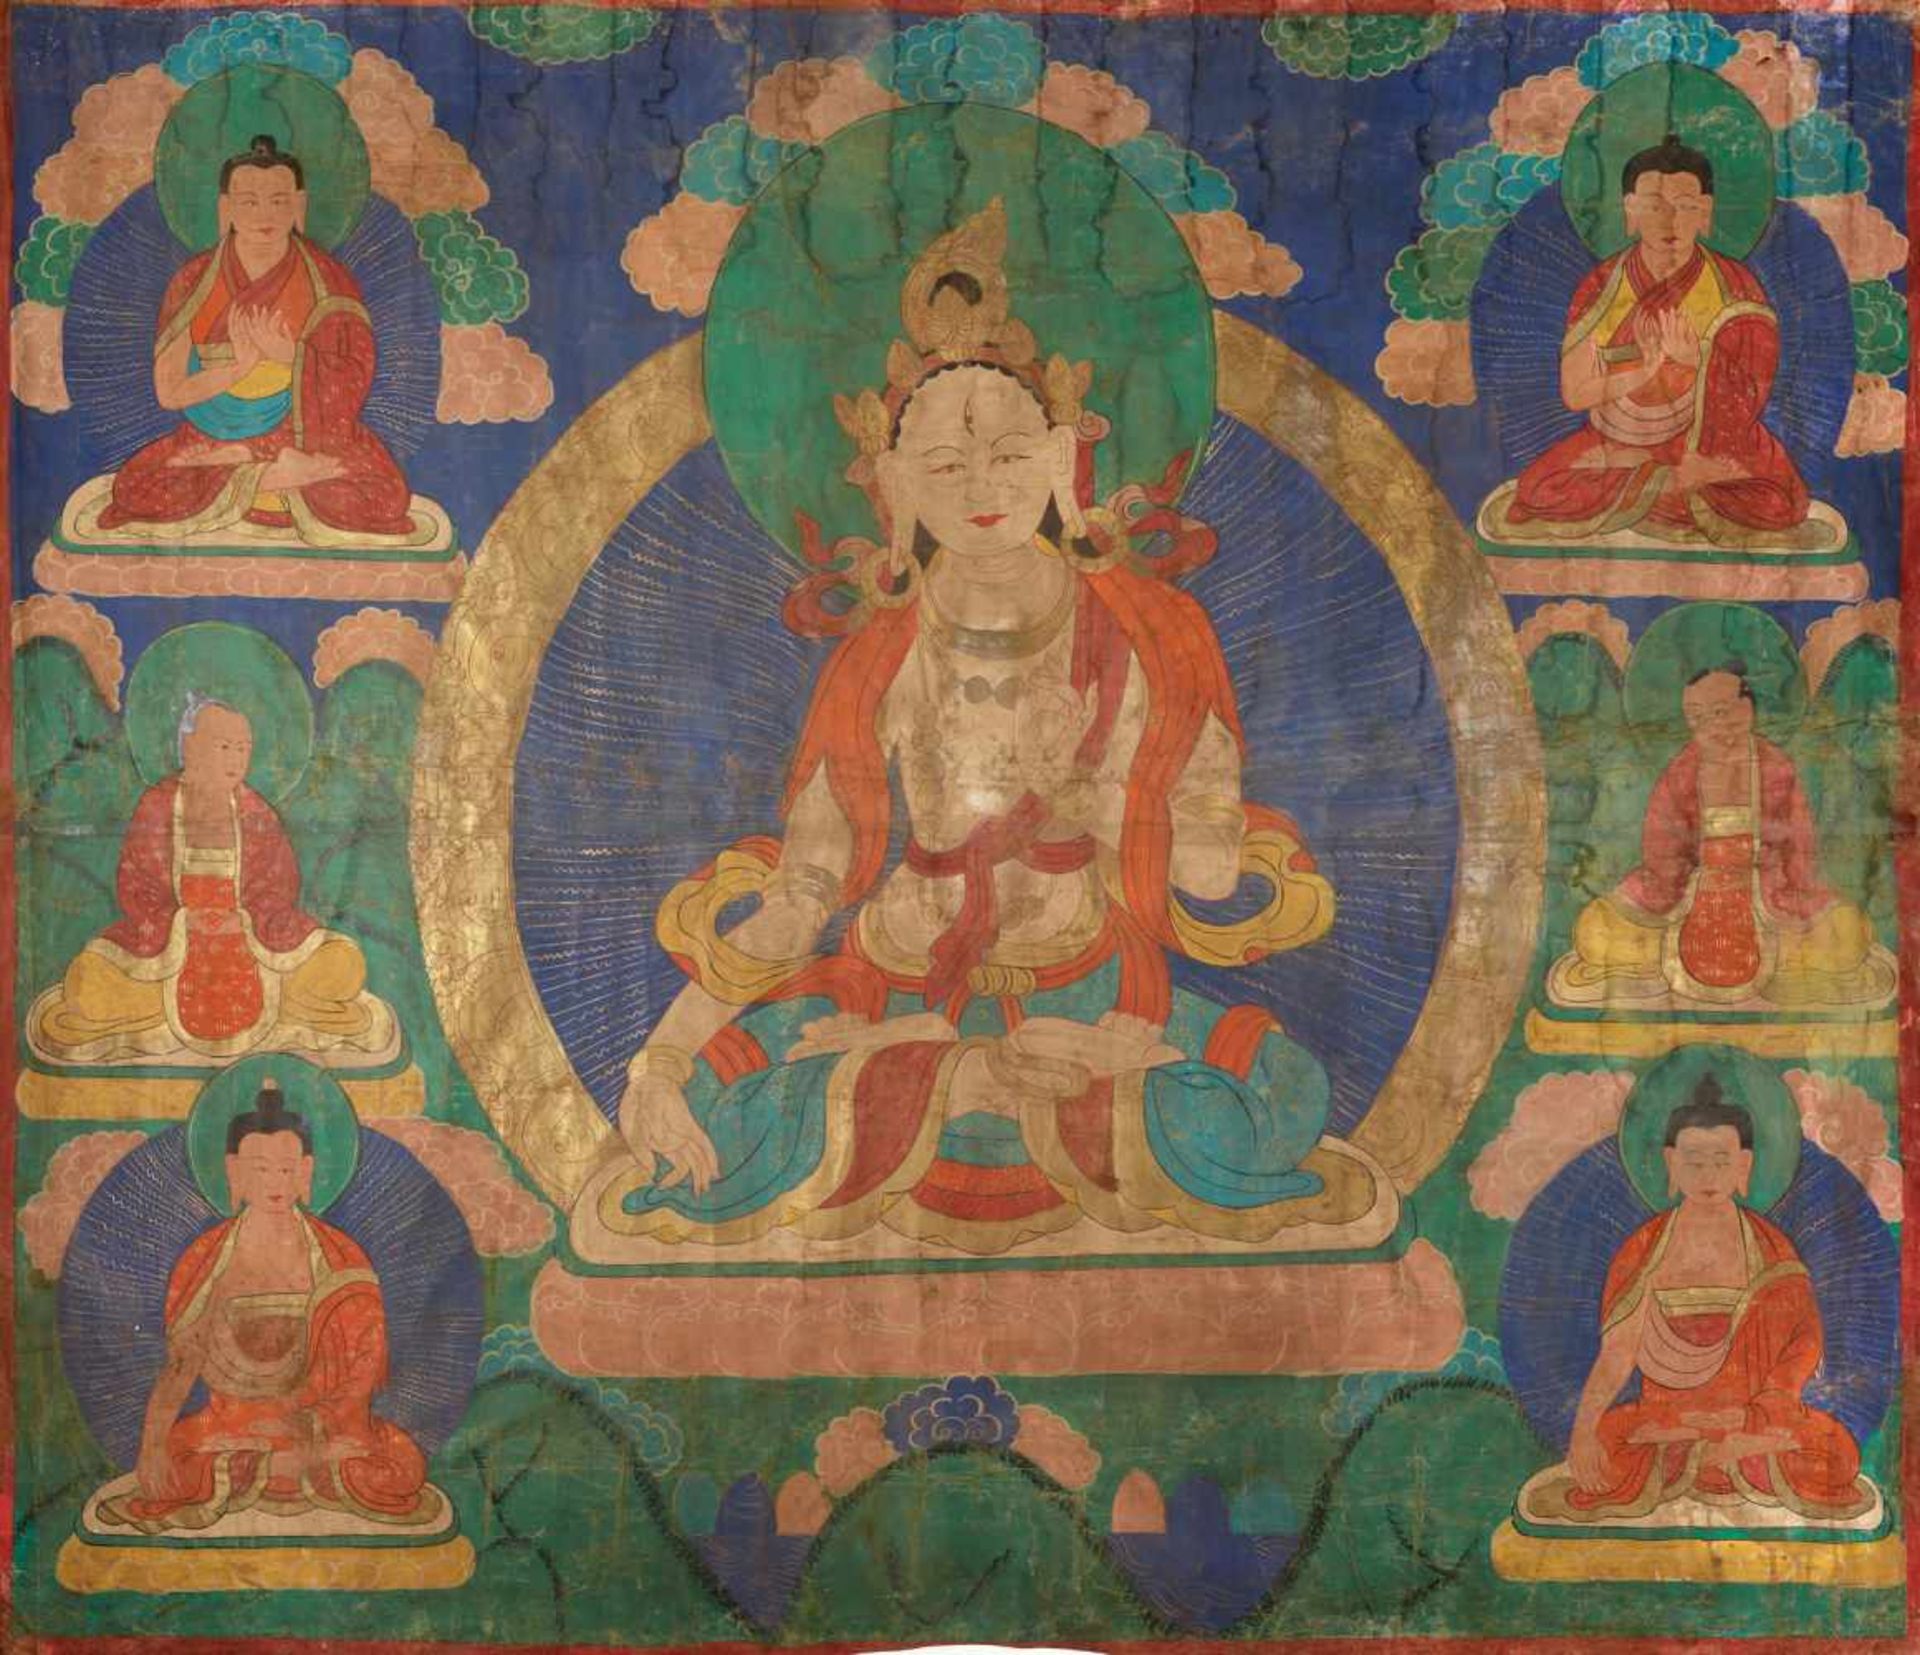 A VERY LARGE TIBETAN THANGKA WITH SITATARA, 19th CENTURY Distemper and gold paint on cloth Tibet,